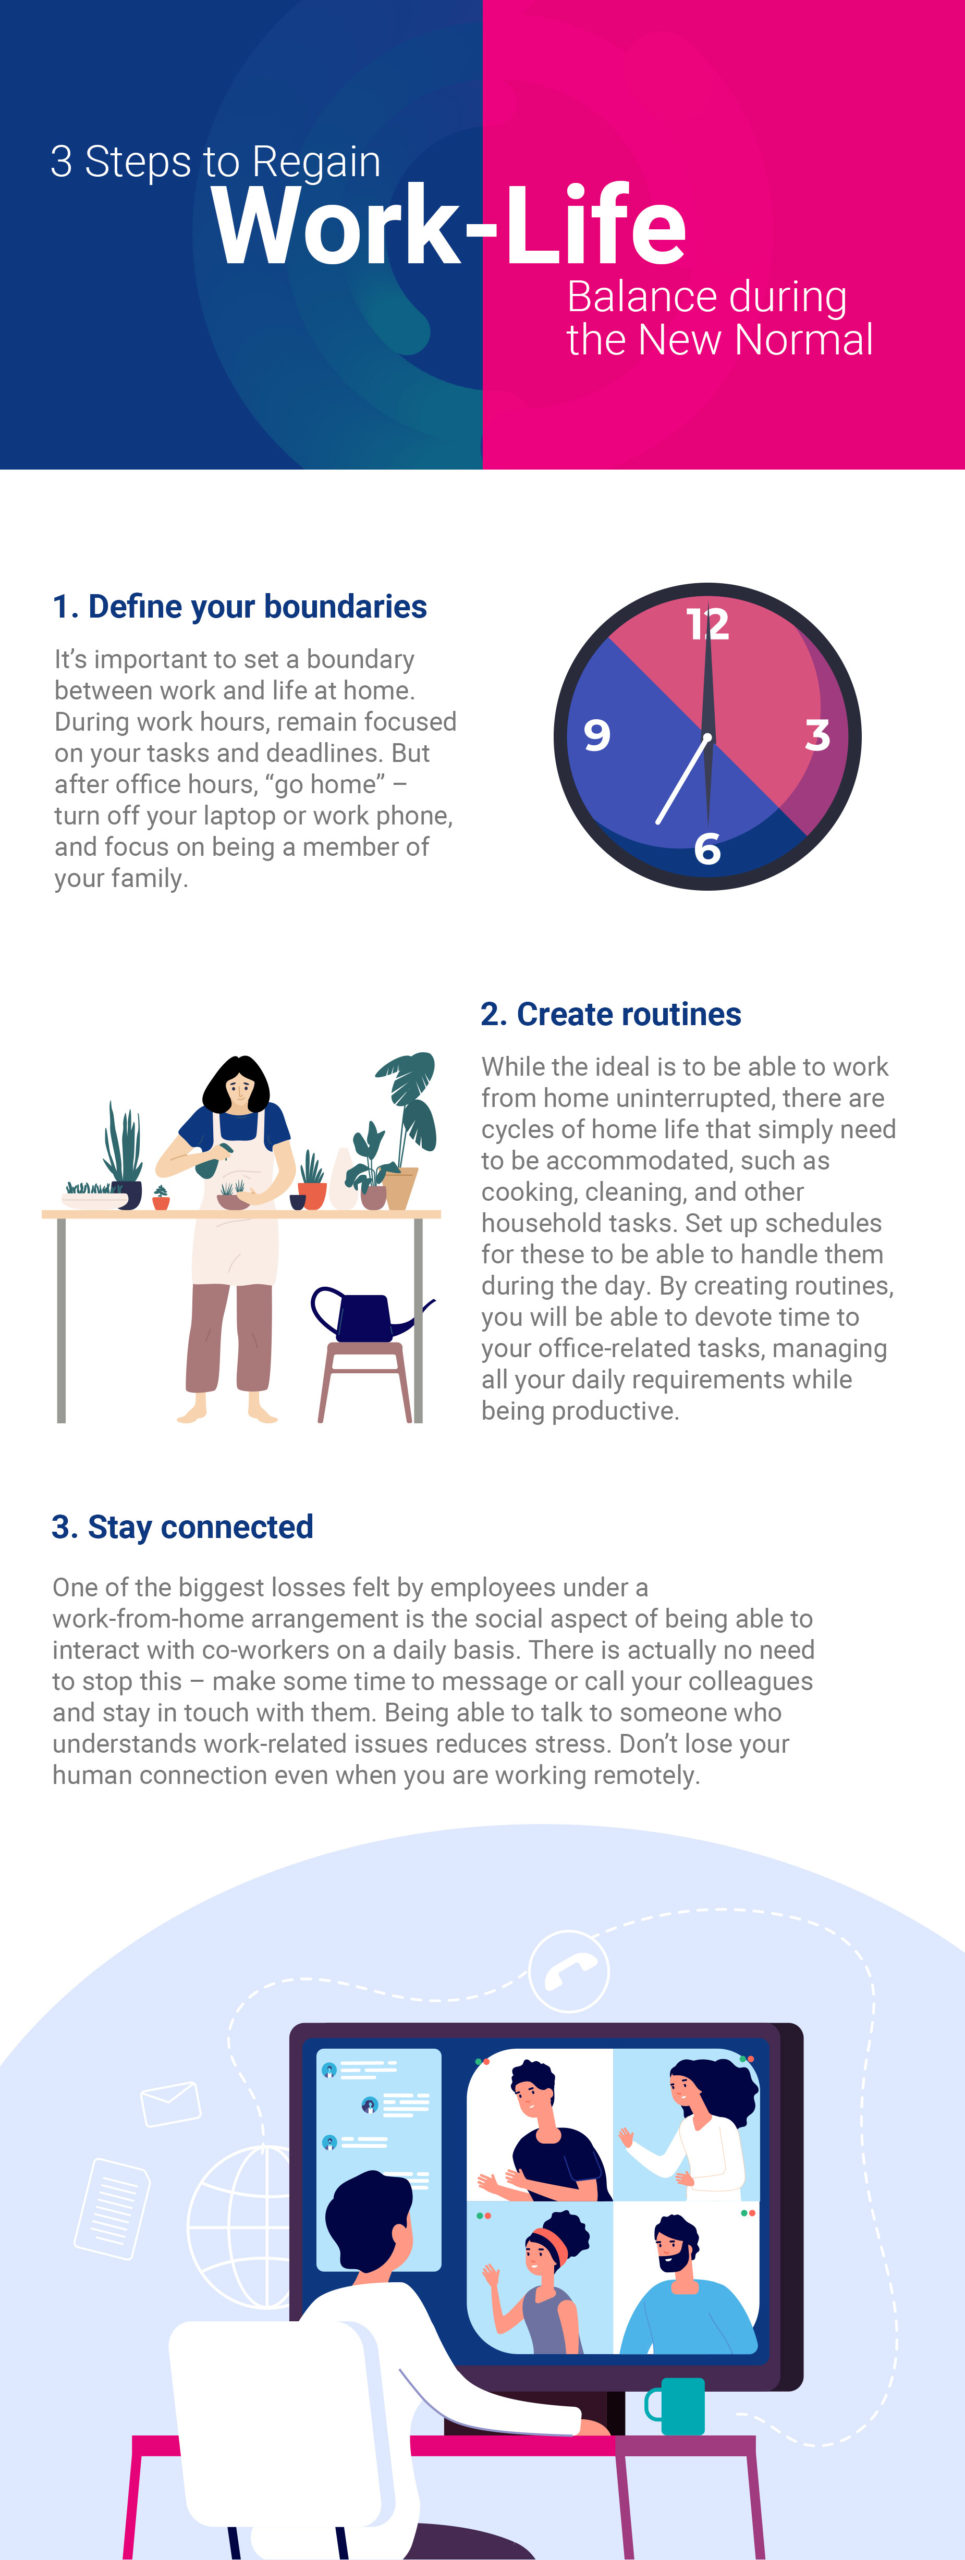 Jobstreet_July2020_Infographic_3-Steps-to-Regain-Work-Life-Balance-during-the-New-Normal